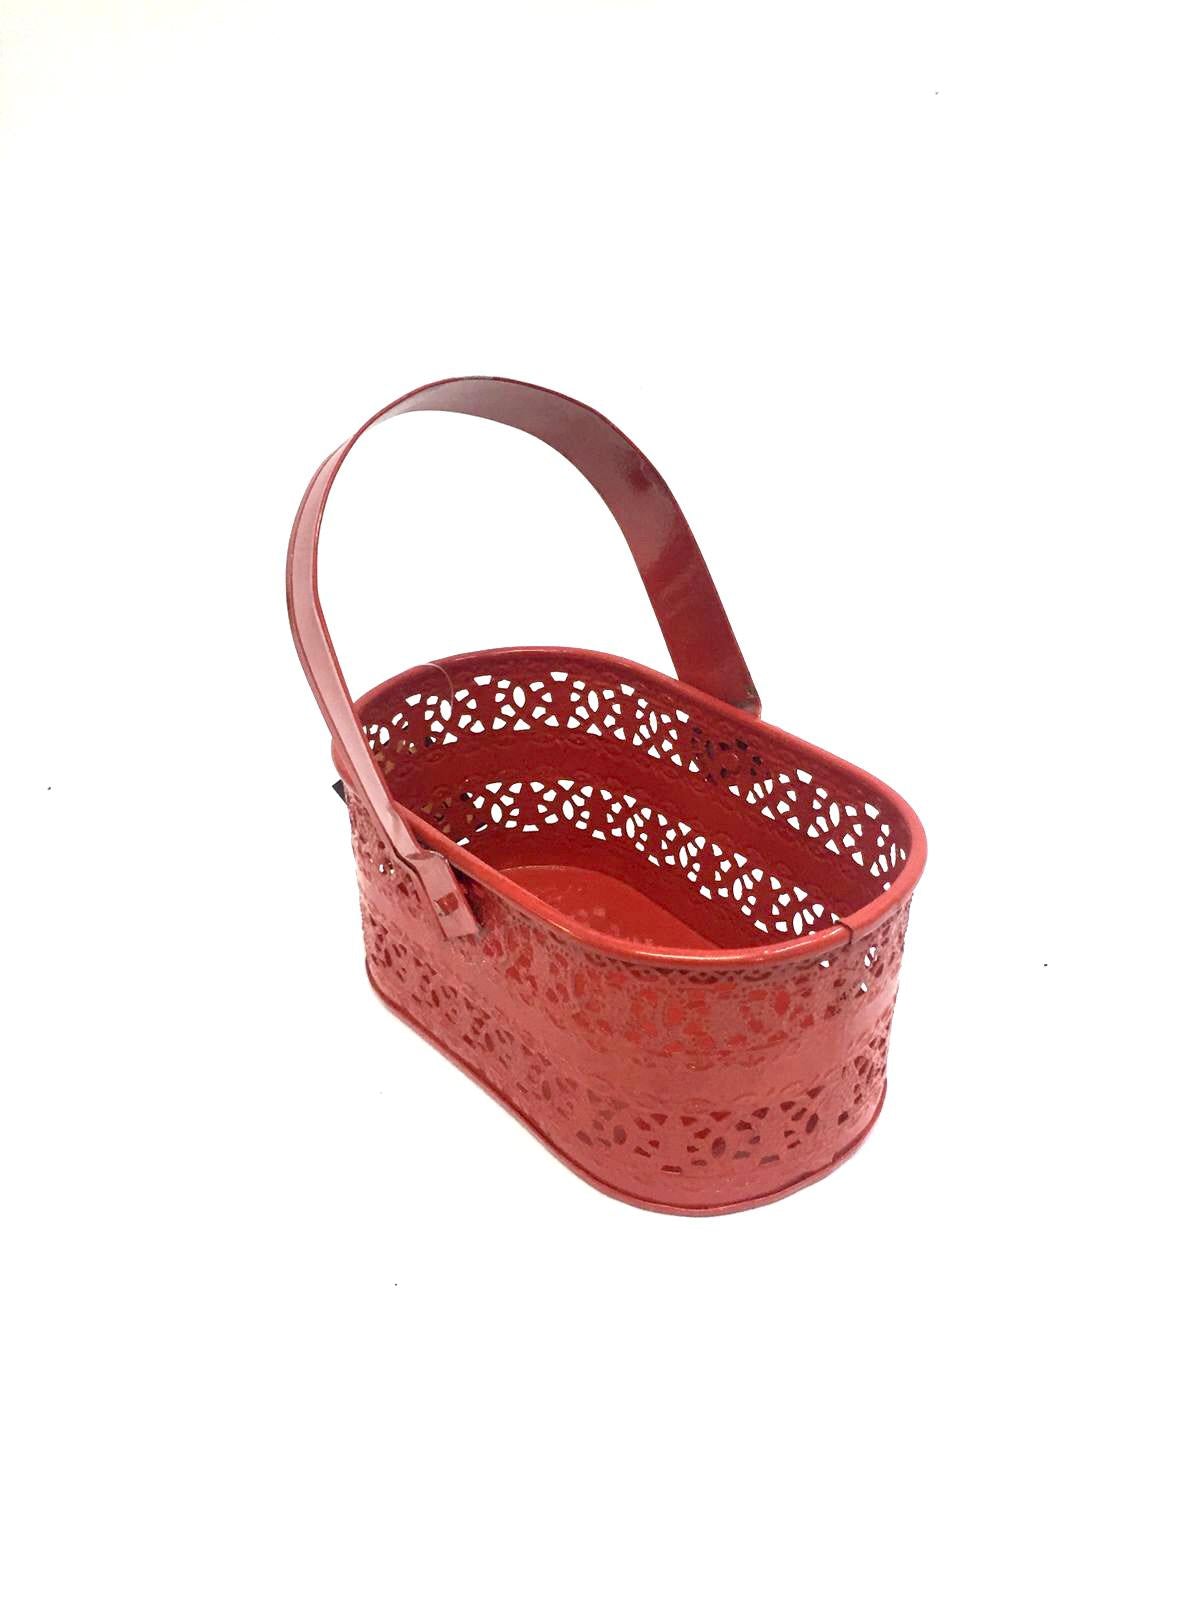 Basket Style Storage Metal Handcrafted With Easy Carry Handle By Tamrapatra